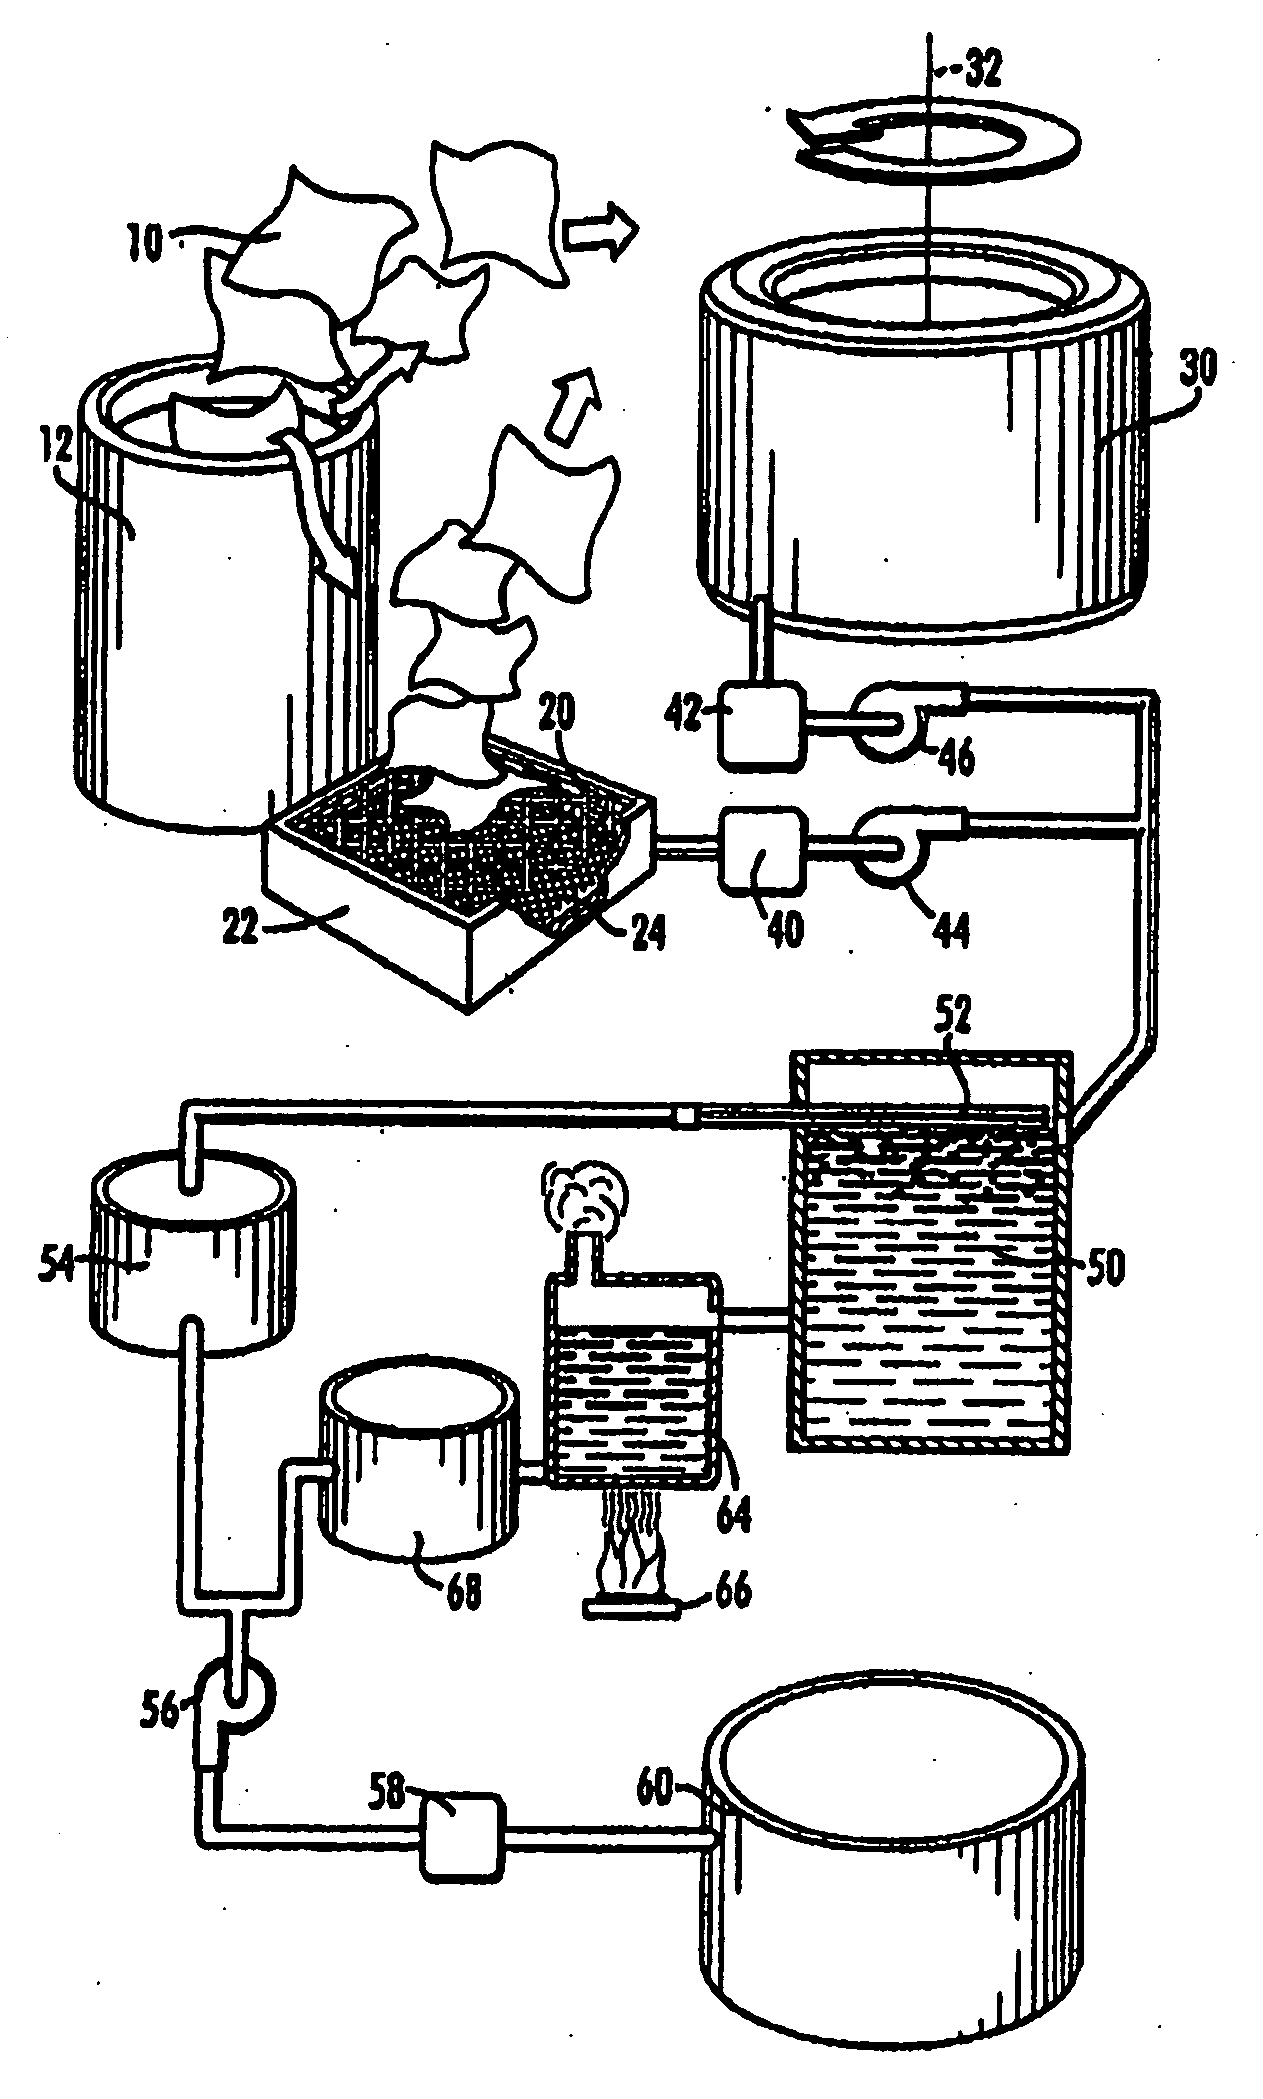 Cleaning fluid and methods